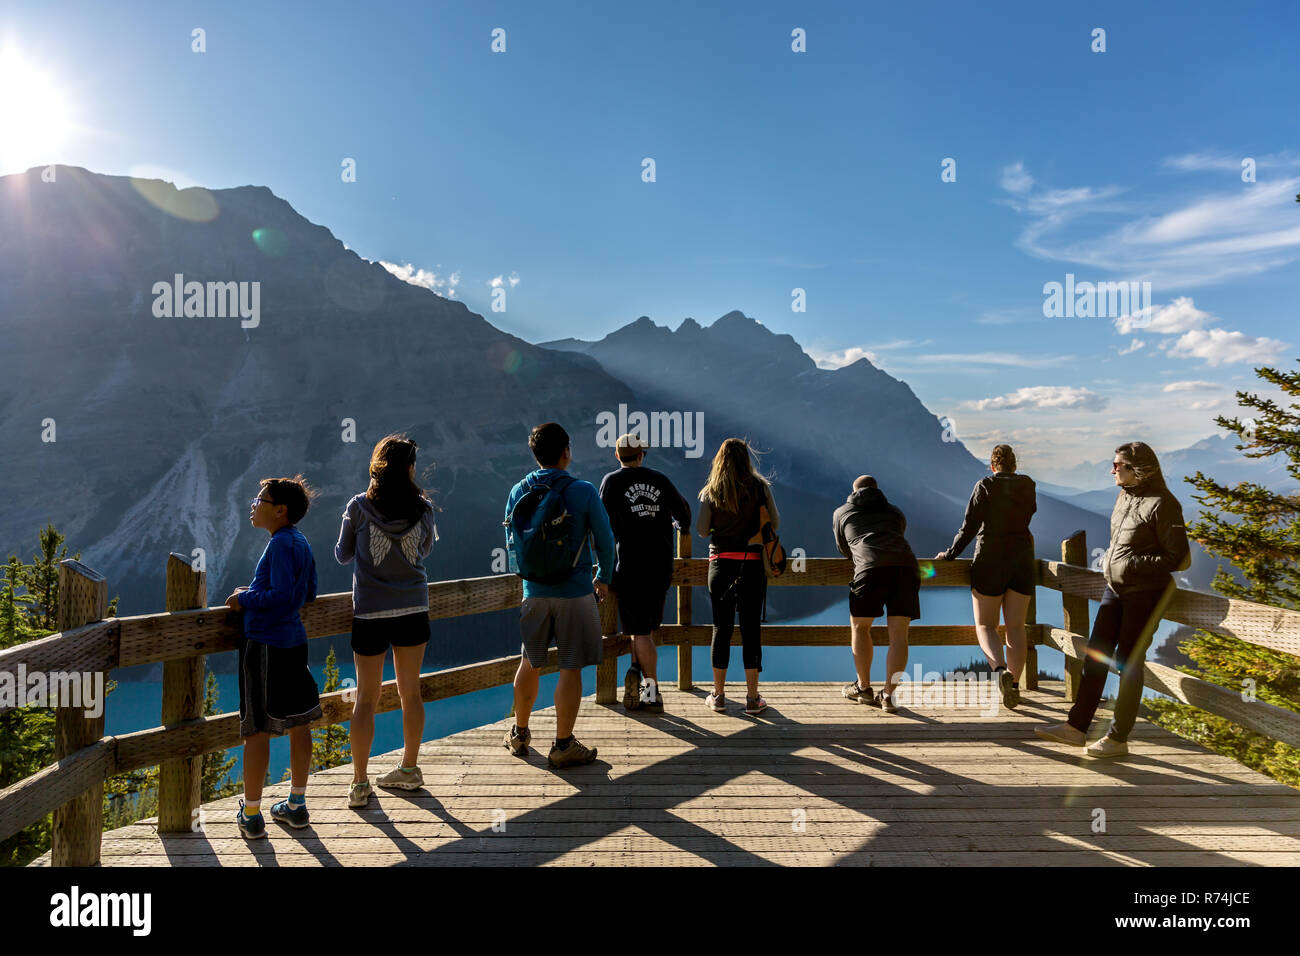 Banff, Canada - Sep 13th 2018 - Group of young people in an outlook at the Peyto Lake in a late afternoon light in Canada Stock Photo